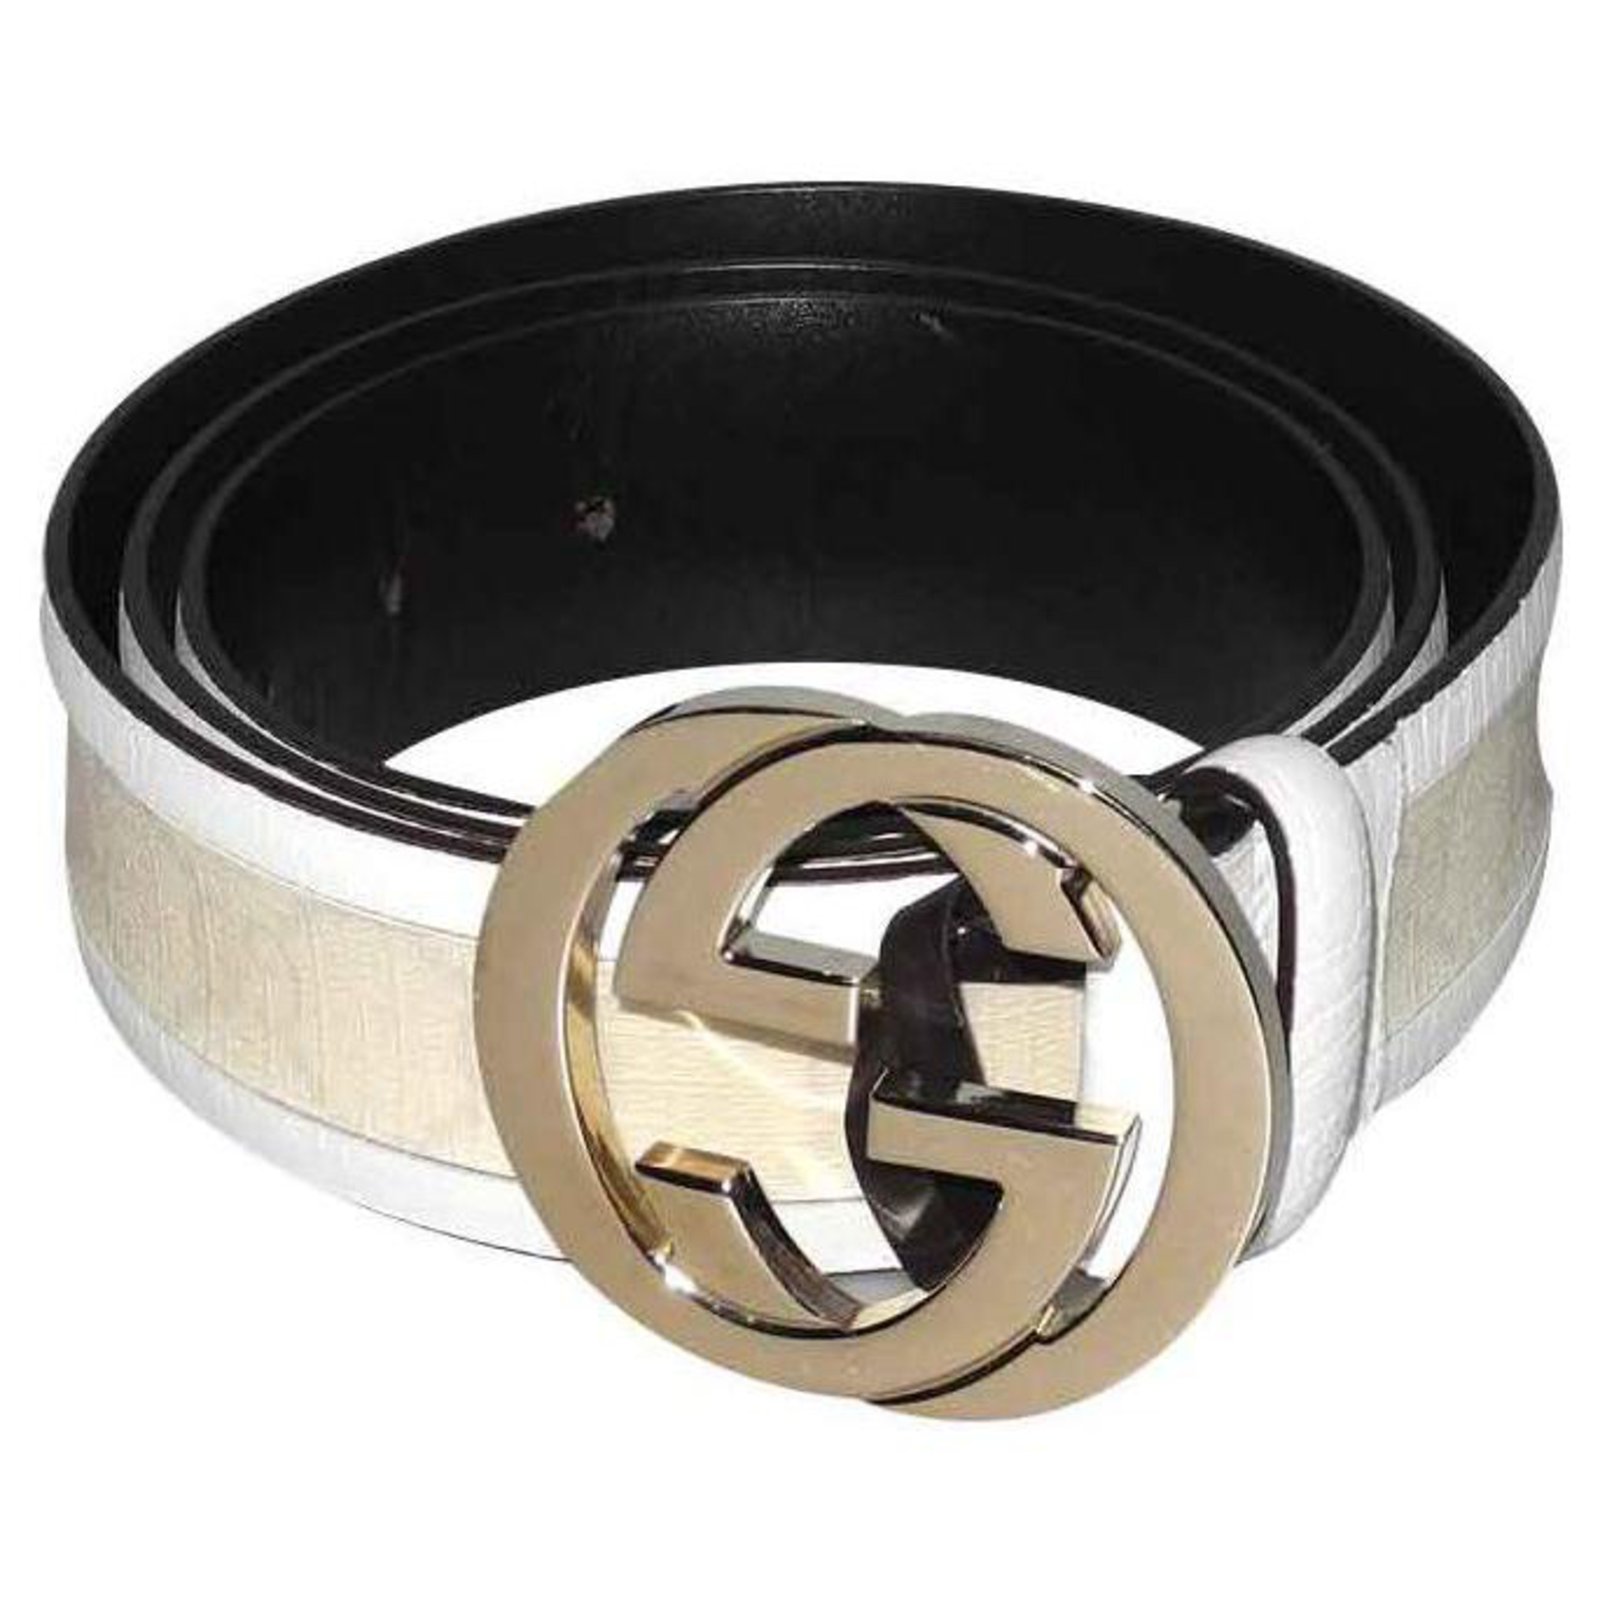 white leather gucci belt